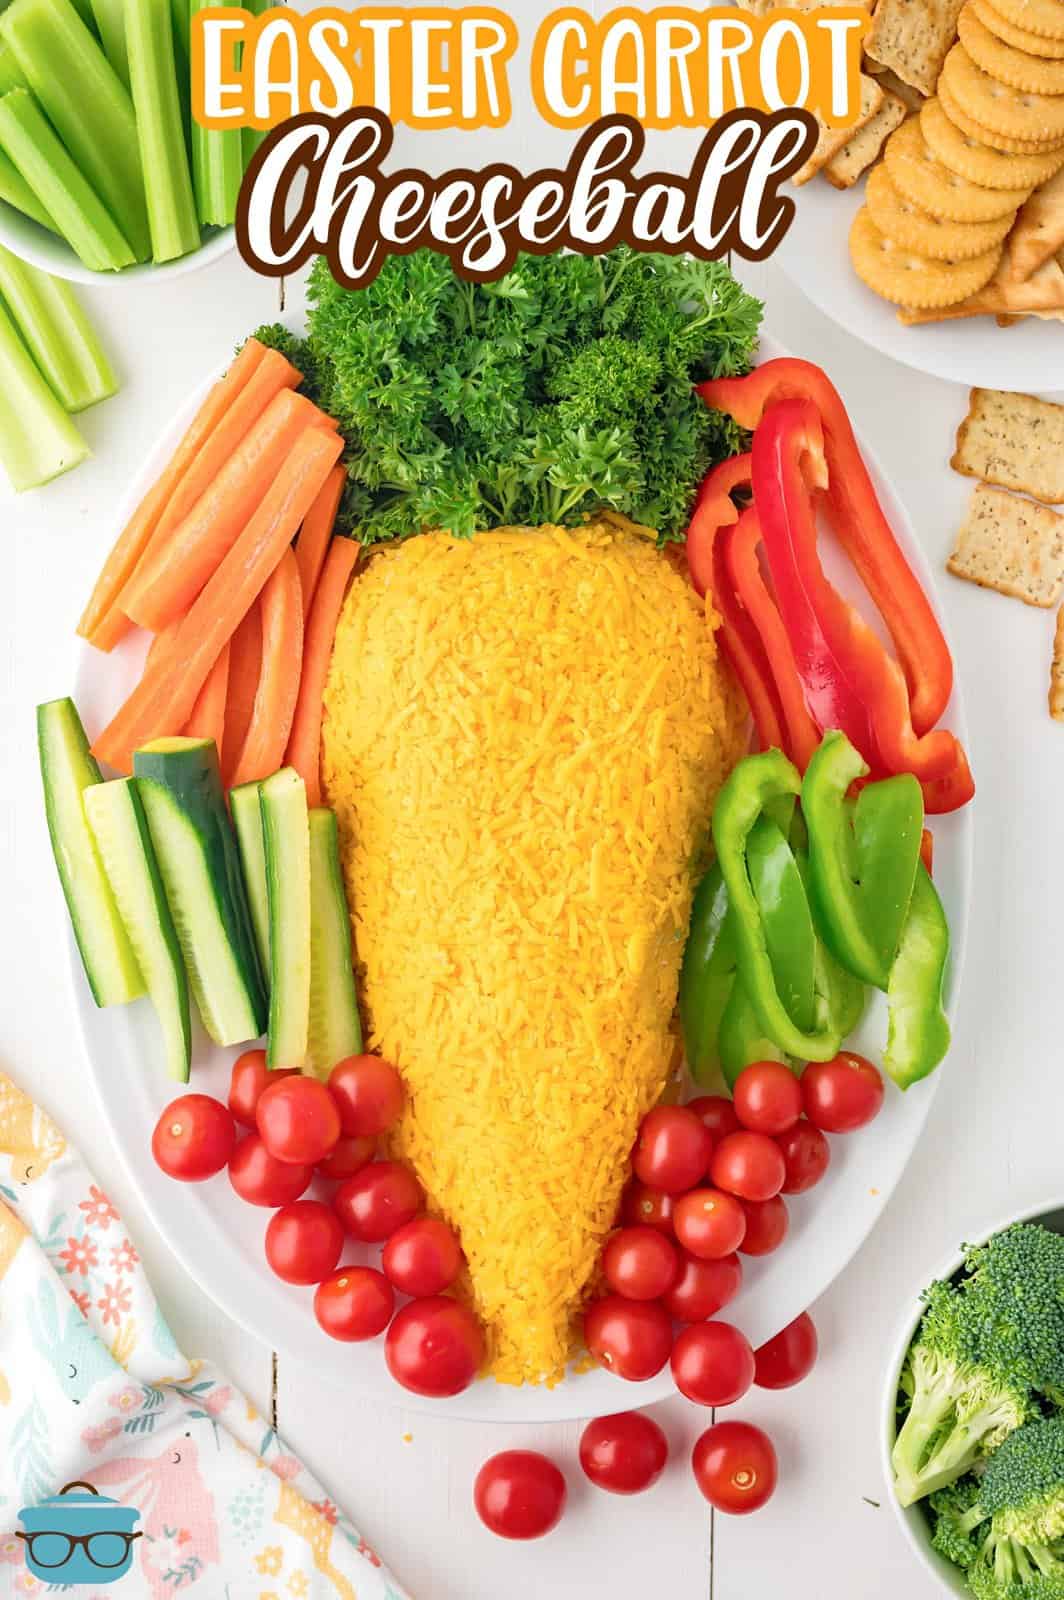 This is a photo of an Easter Carrot Cheeseball on a white plate with vegetables - tomatoes, peppers, broccoli, cucumber and carrot. 